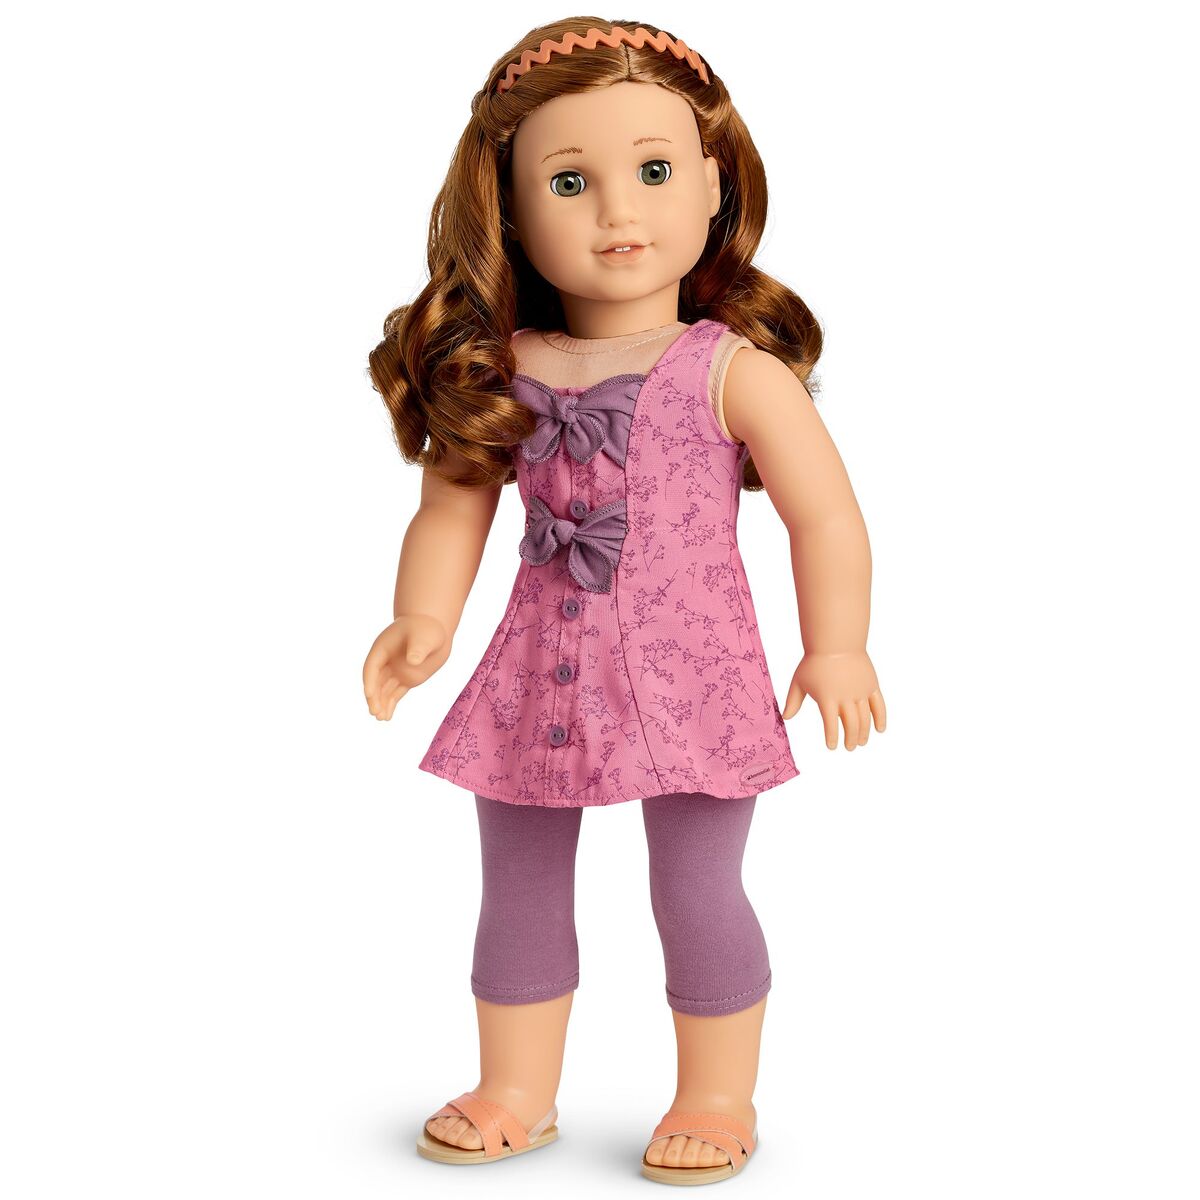 Blaire's Floral Flair Outfit | American Girl Wiki | Fandom